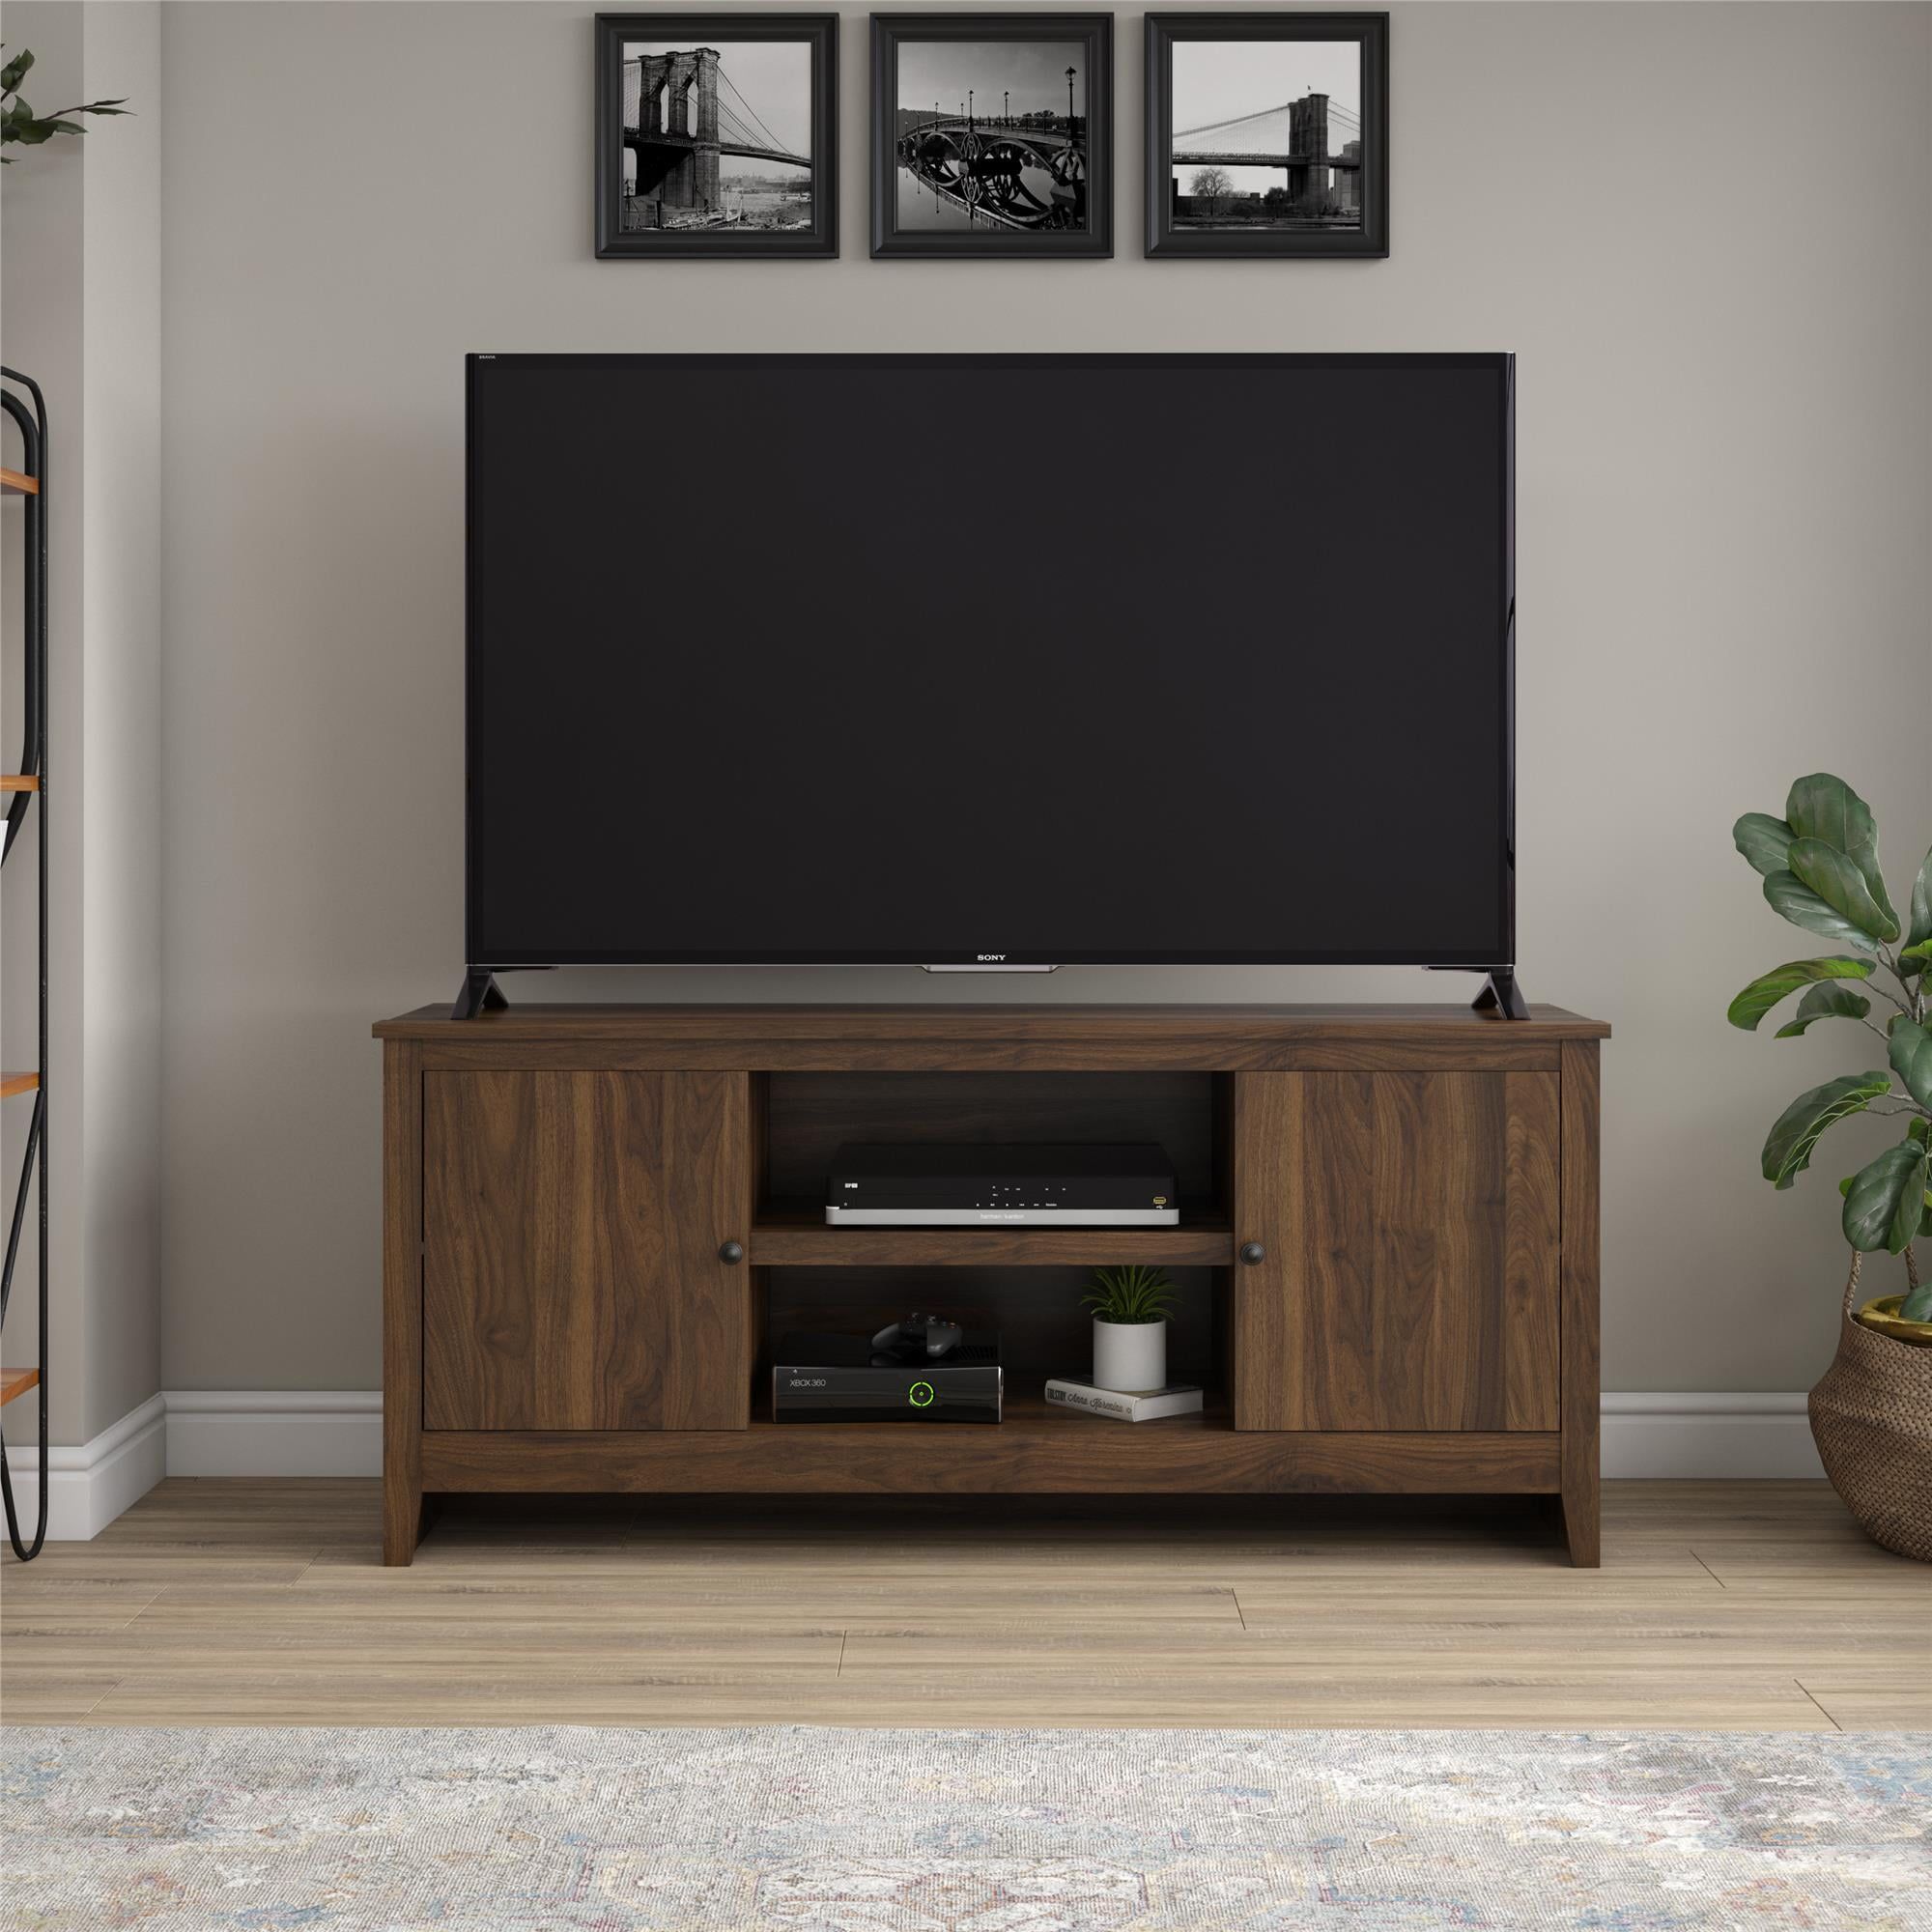 Mainstays Tv Stand For Tvs Up To 65", Walnut – Walmart Regarding Dual Use Storage Cabinet Tv Stands (View 14 of 20)